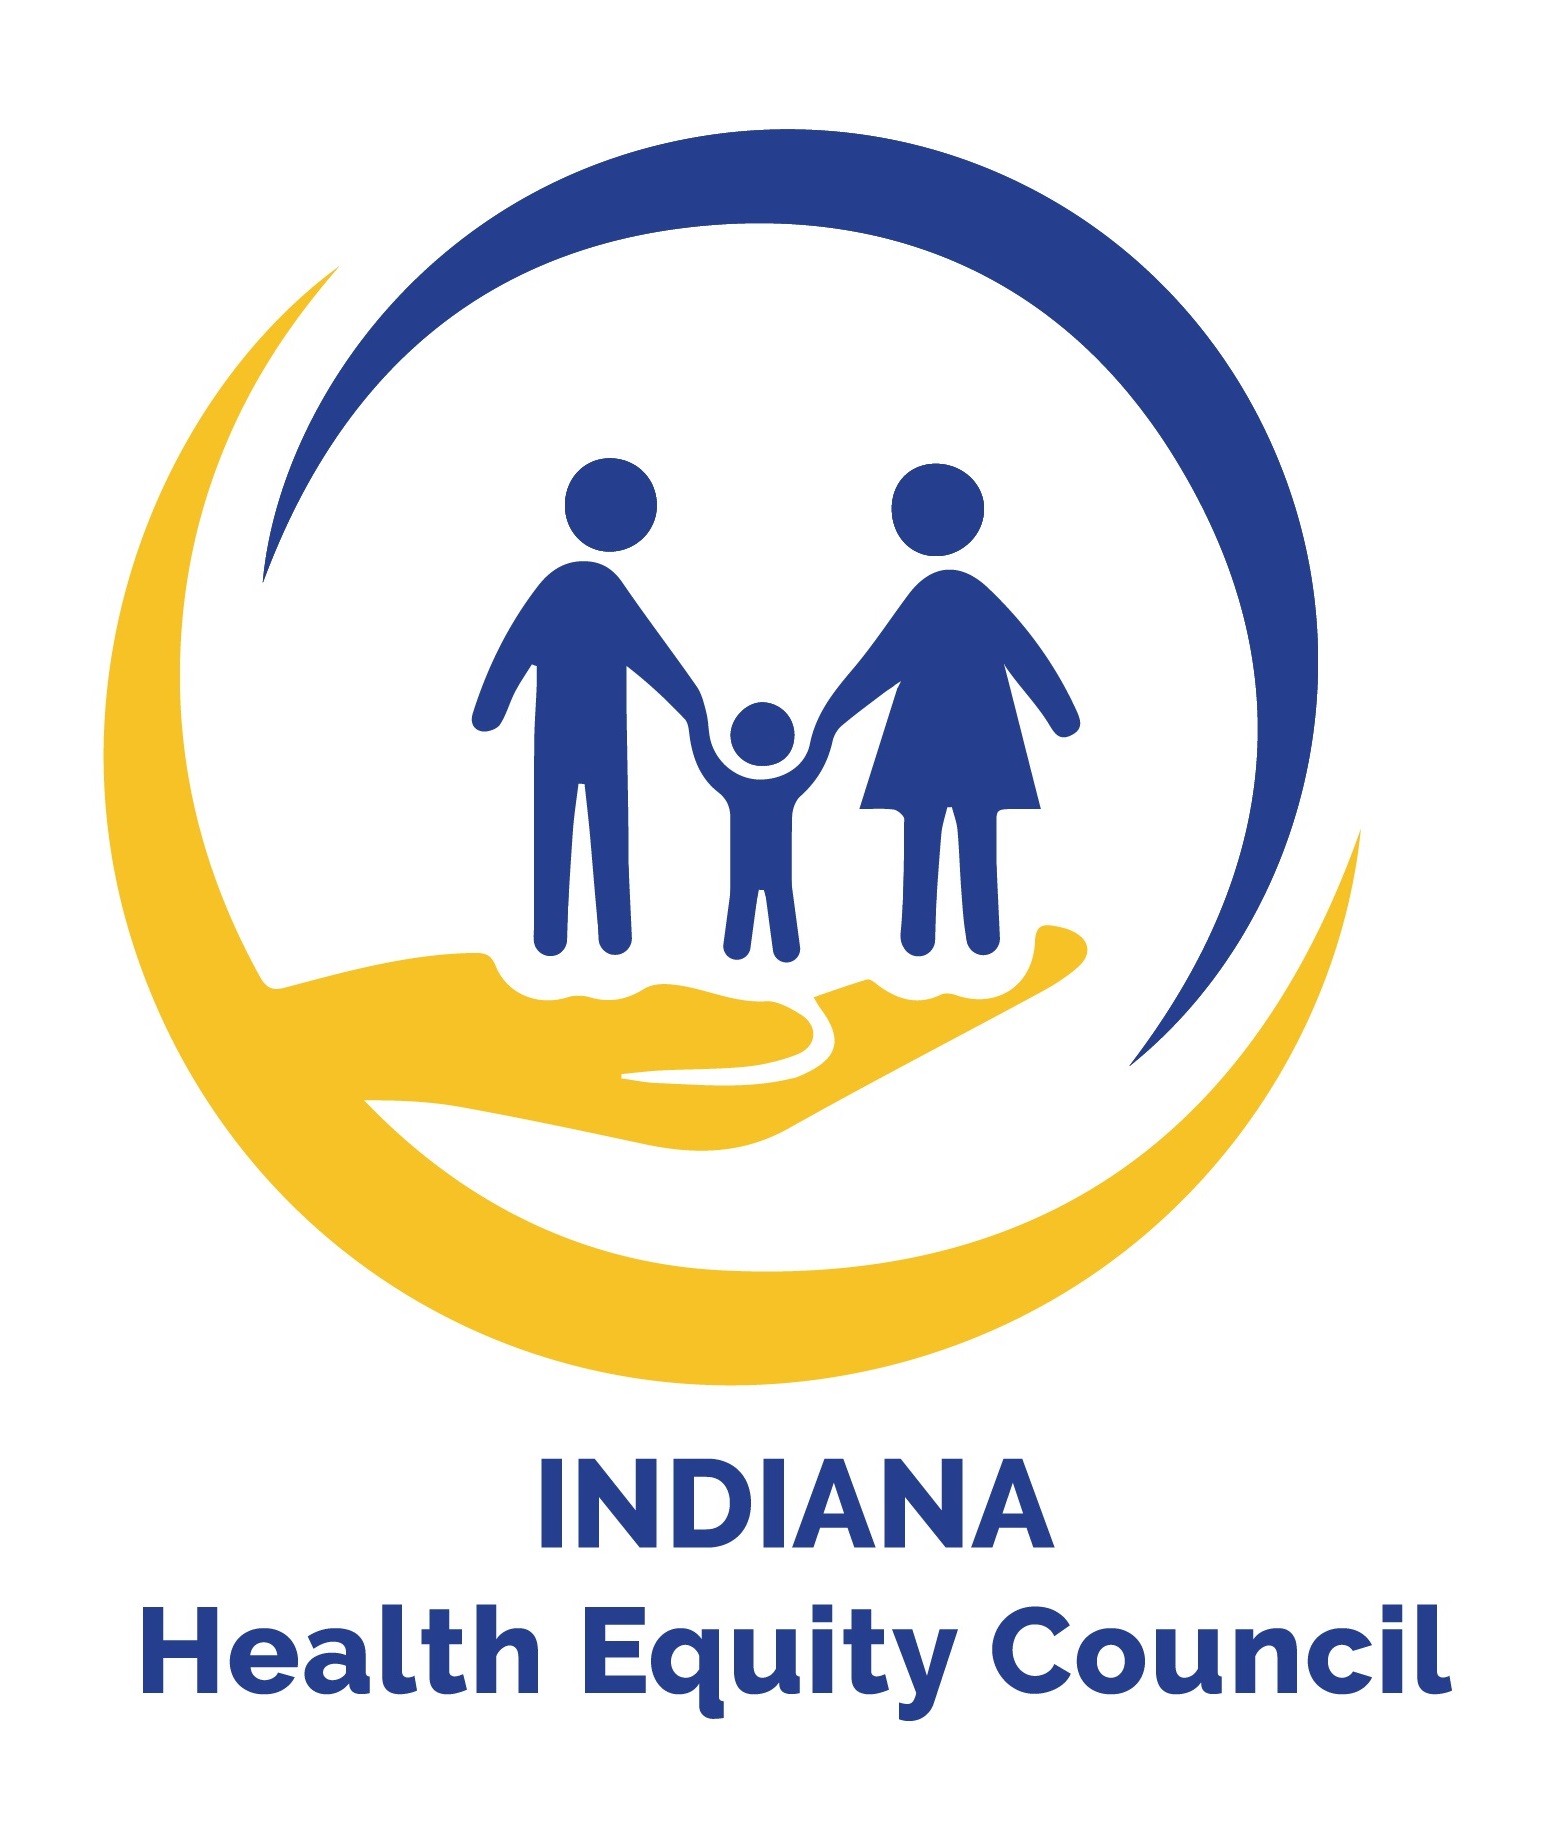 The CHW Model – HEC Health Equity Council